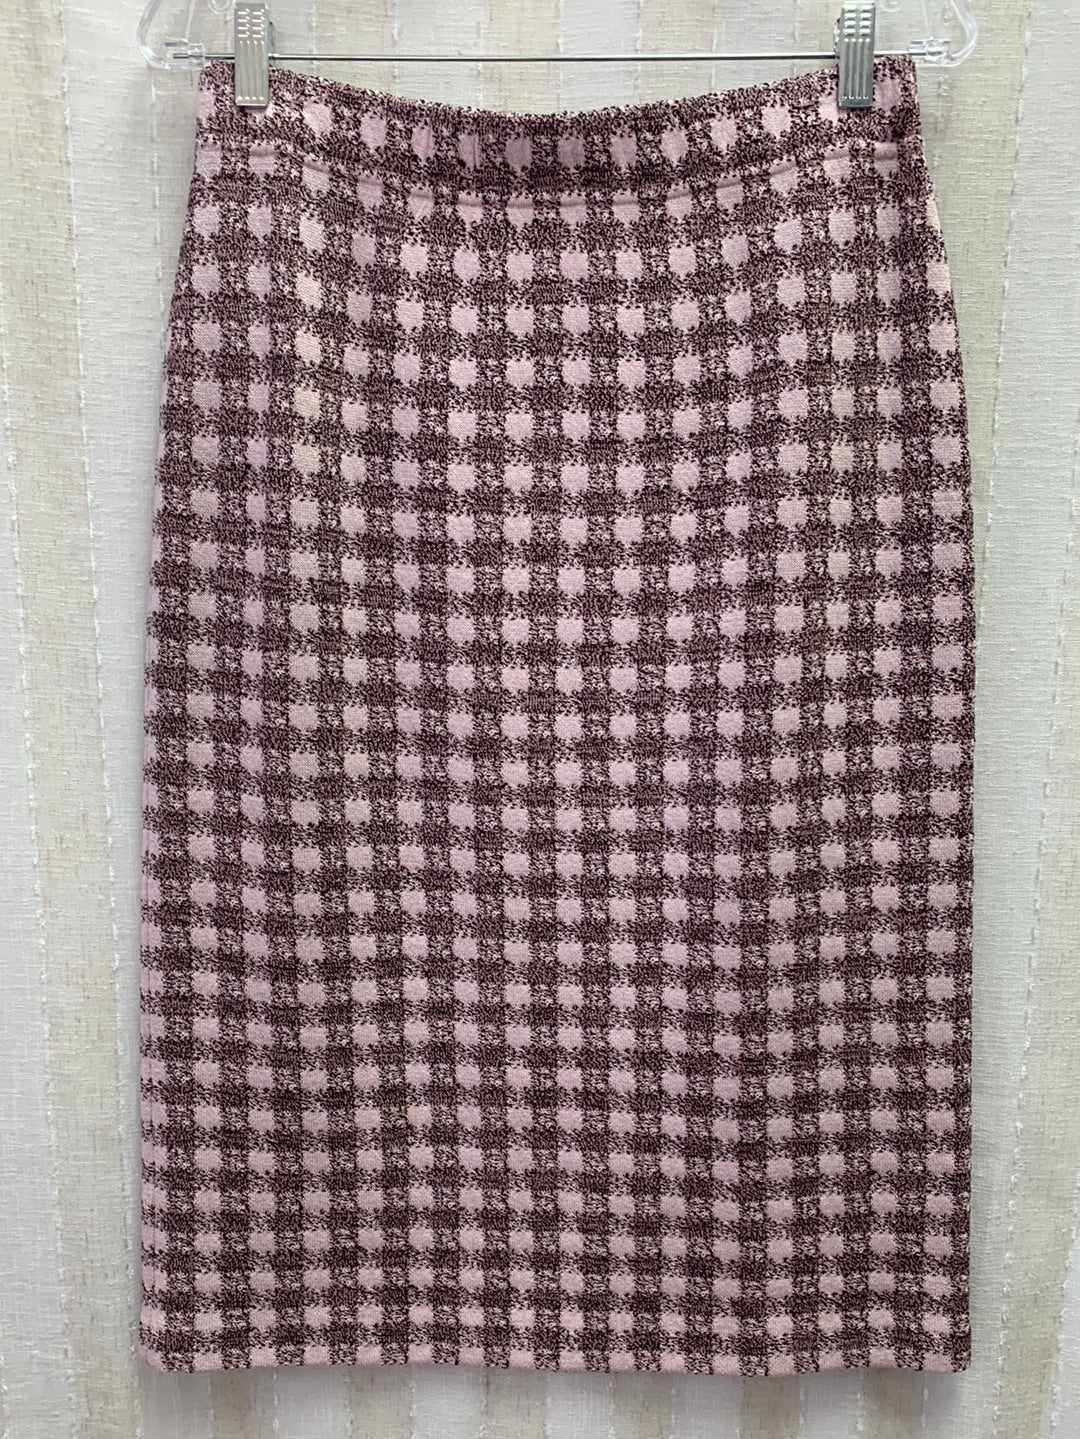 ST JOHN COLLECTION / MARIE GRAY pink brown Knit Texture Pull On Midi Skirt - 10